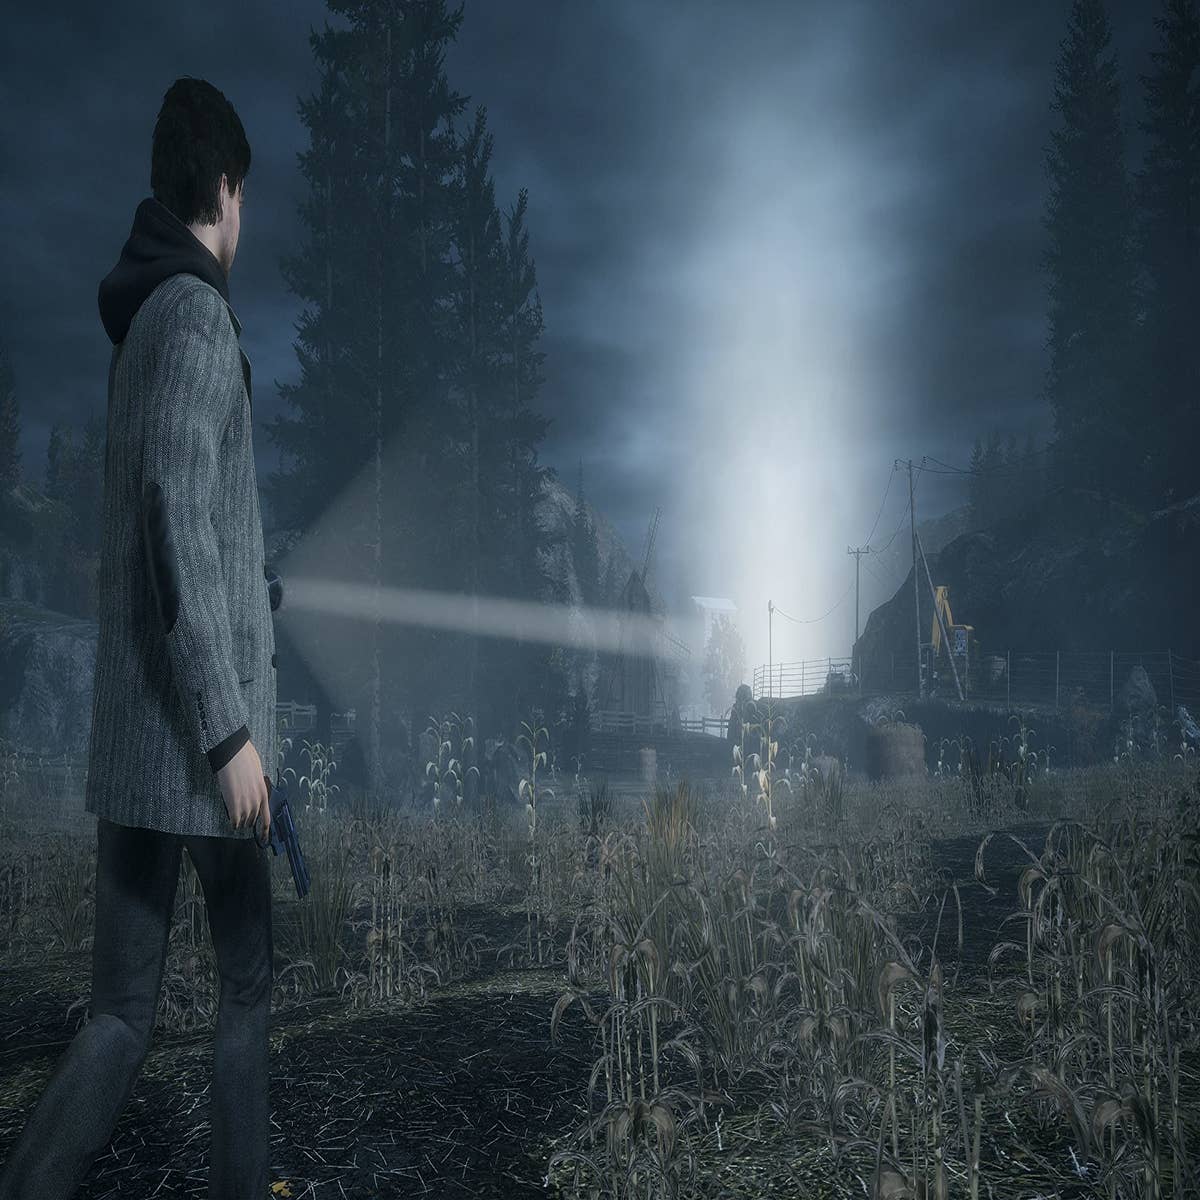 Alan Wake Remastered PC Epic Games Store Release Leaked